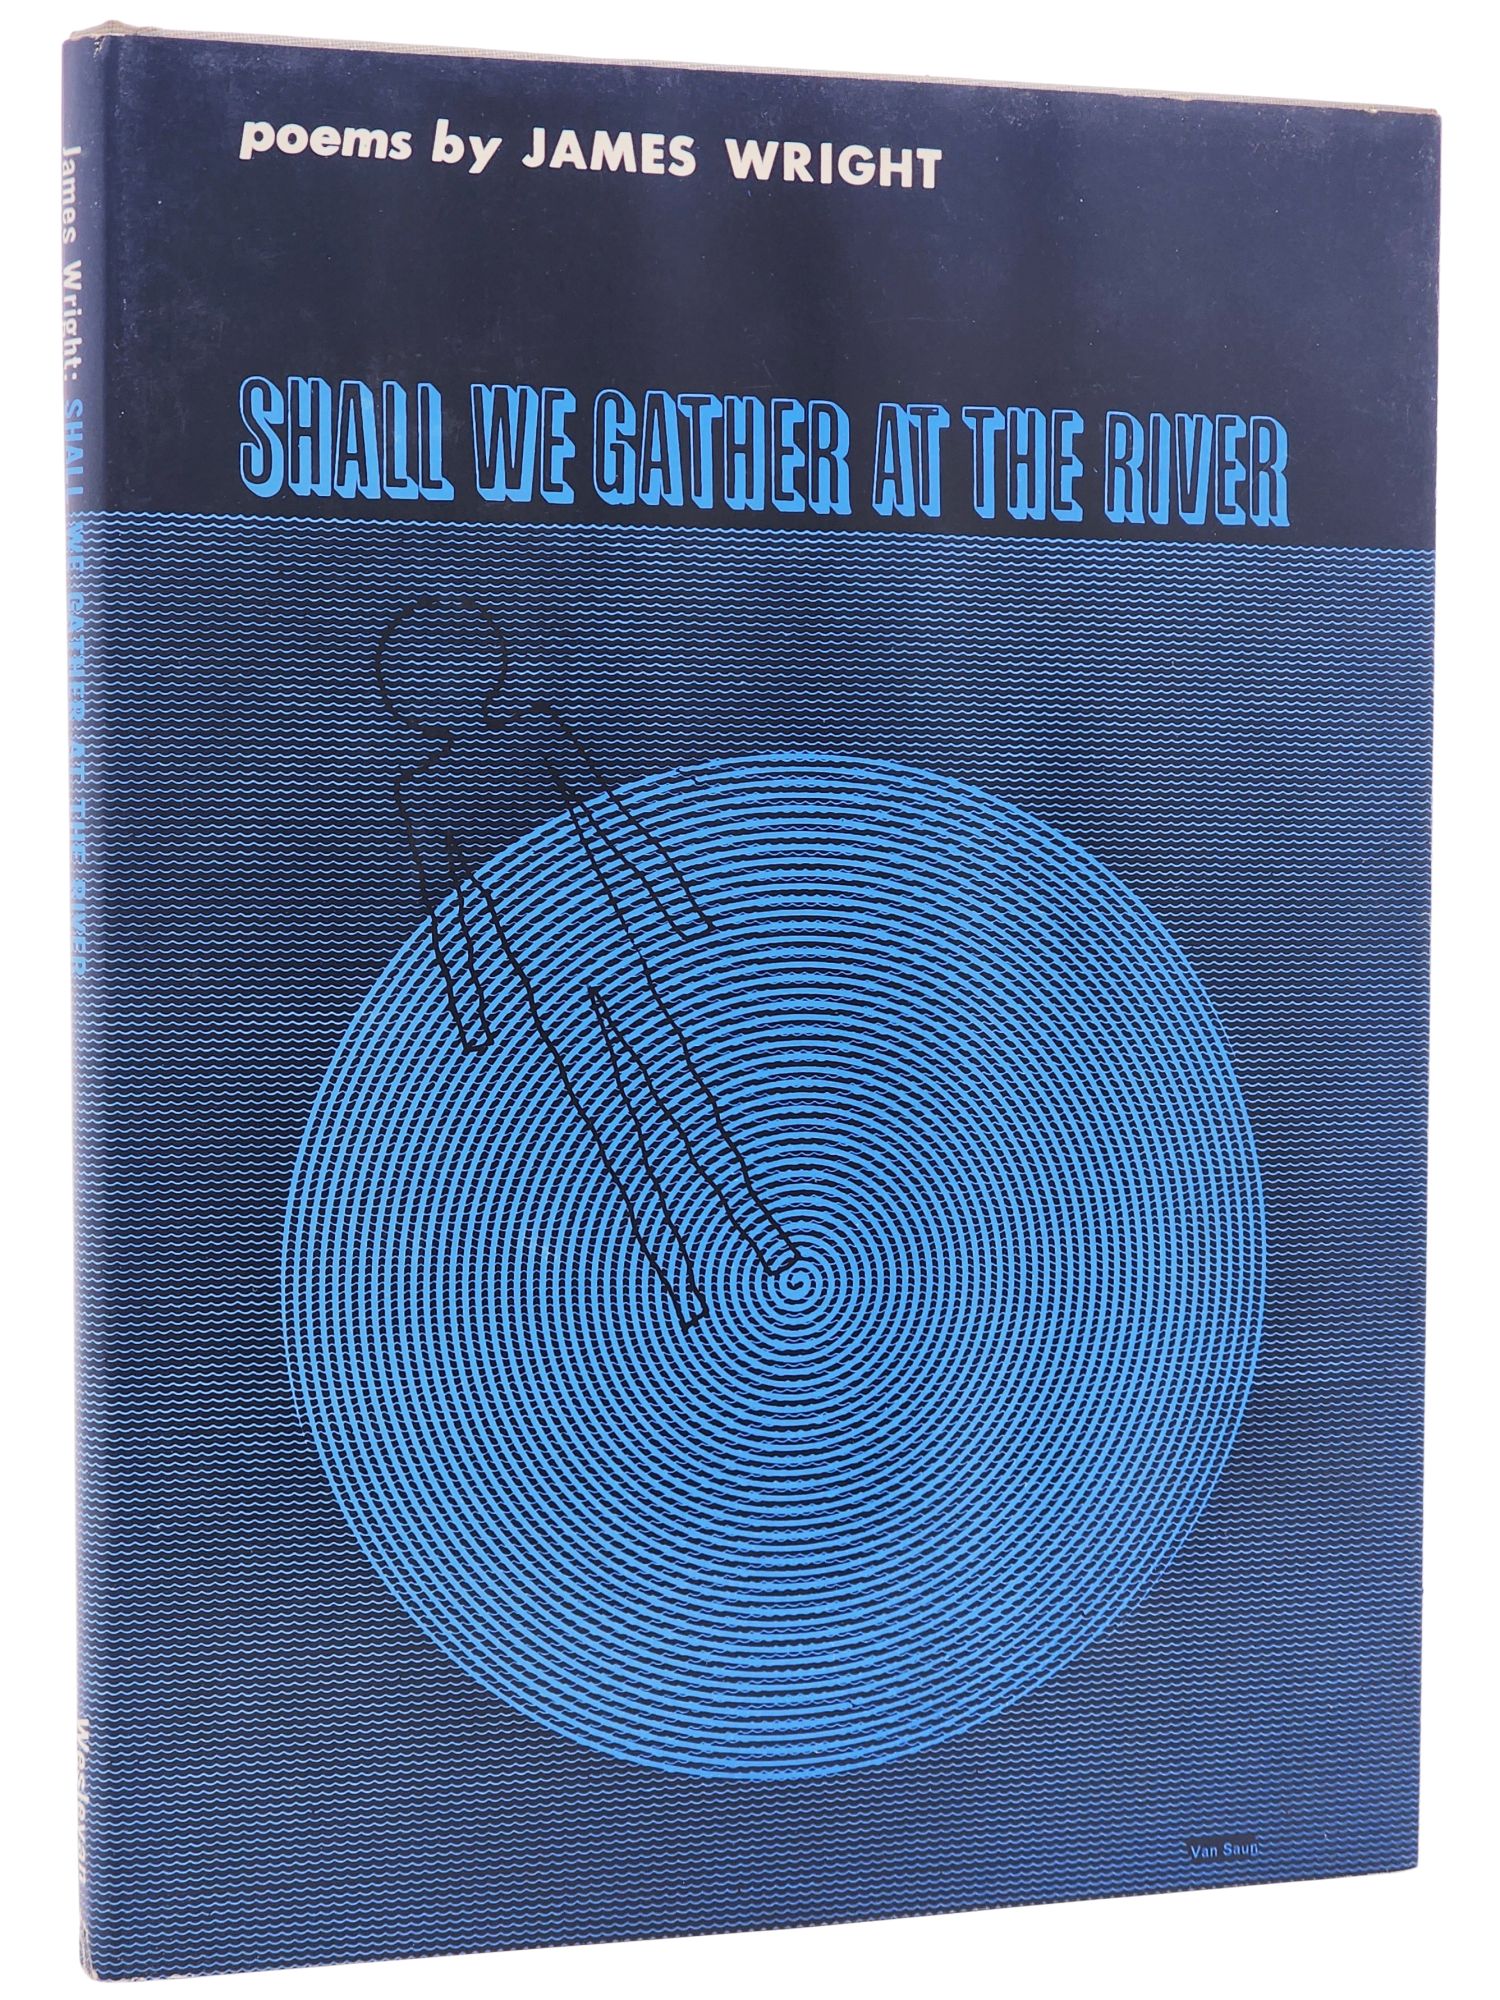 [Book #29373] SHALL WE GATHER AT THE RIVER. James Wright.